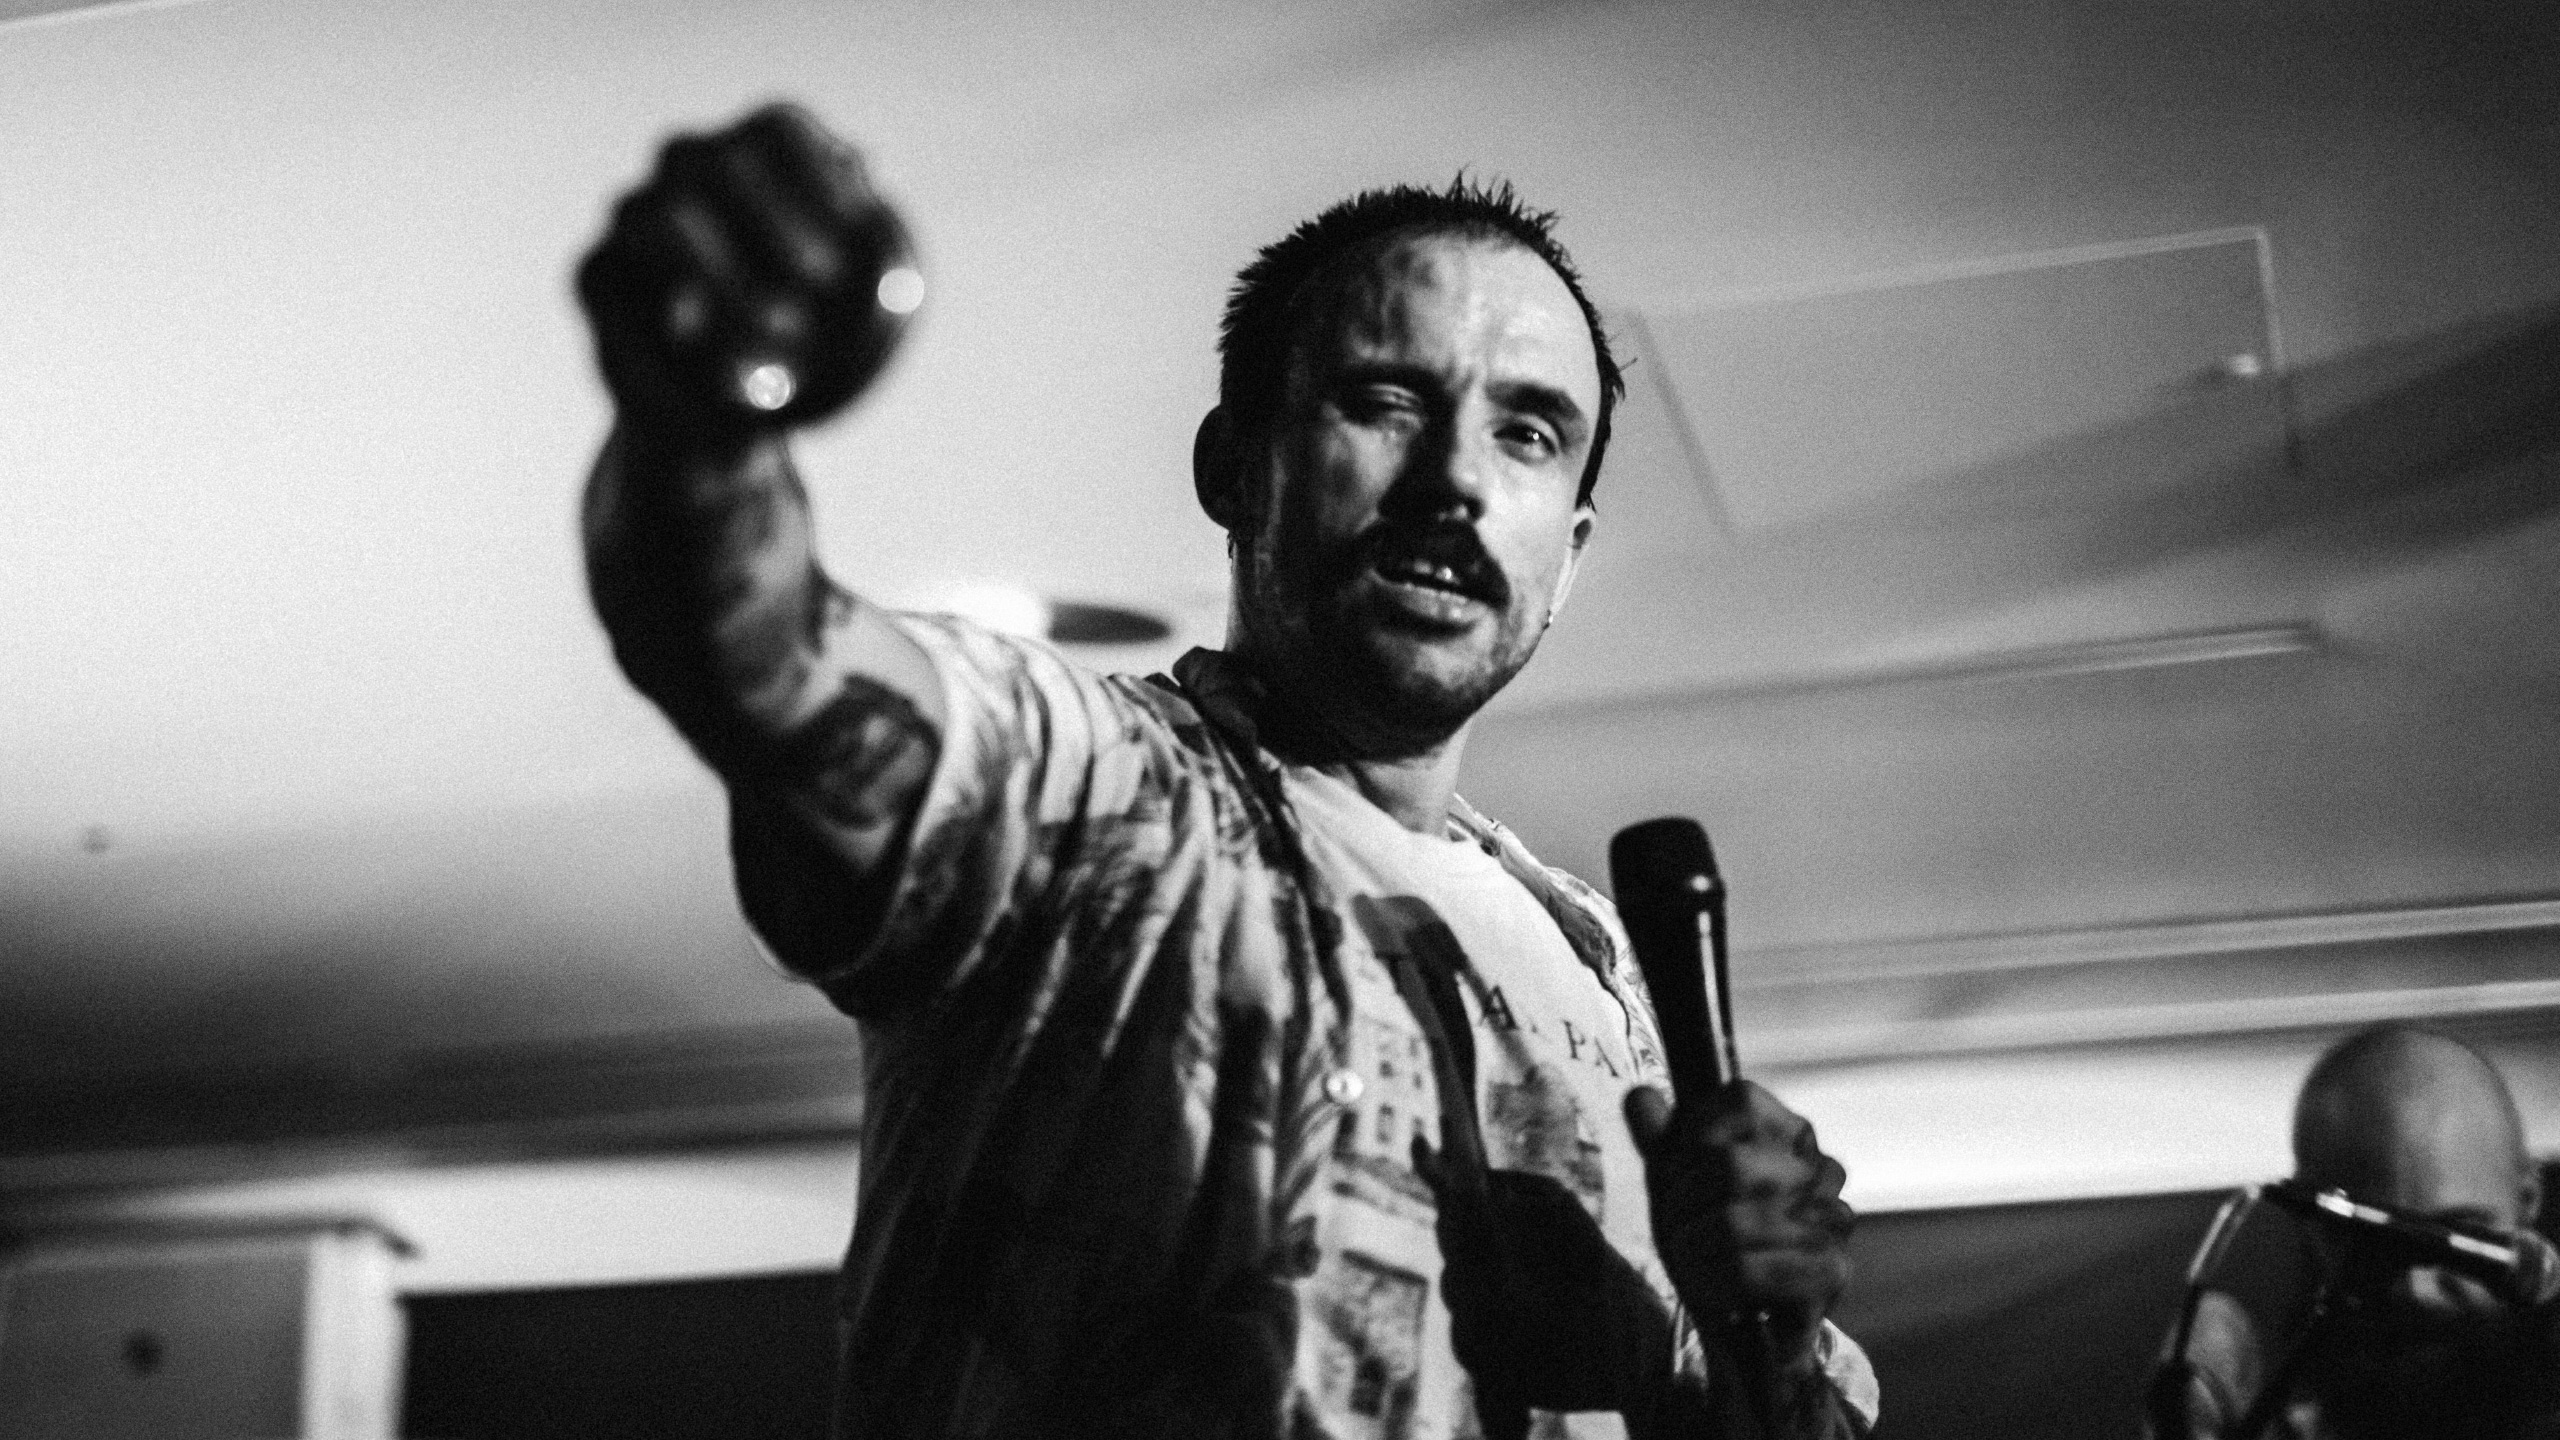 Idles frontman Joe Talbot punching his fist on stage at PRS for Music Presents